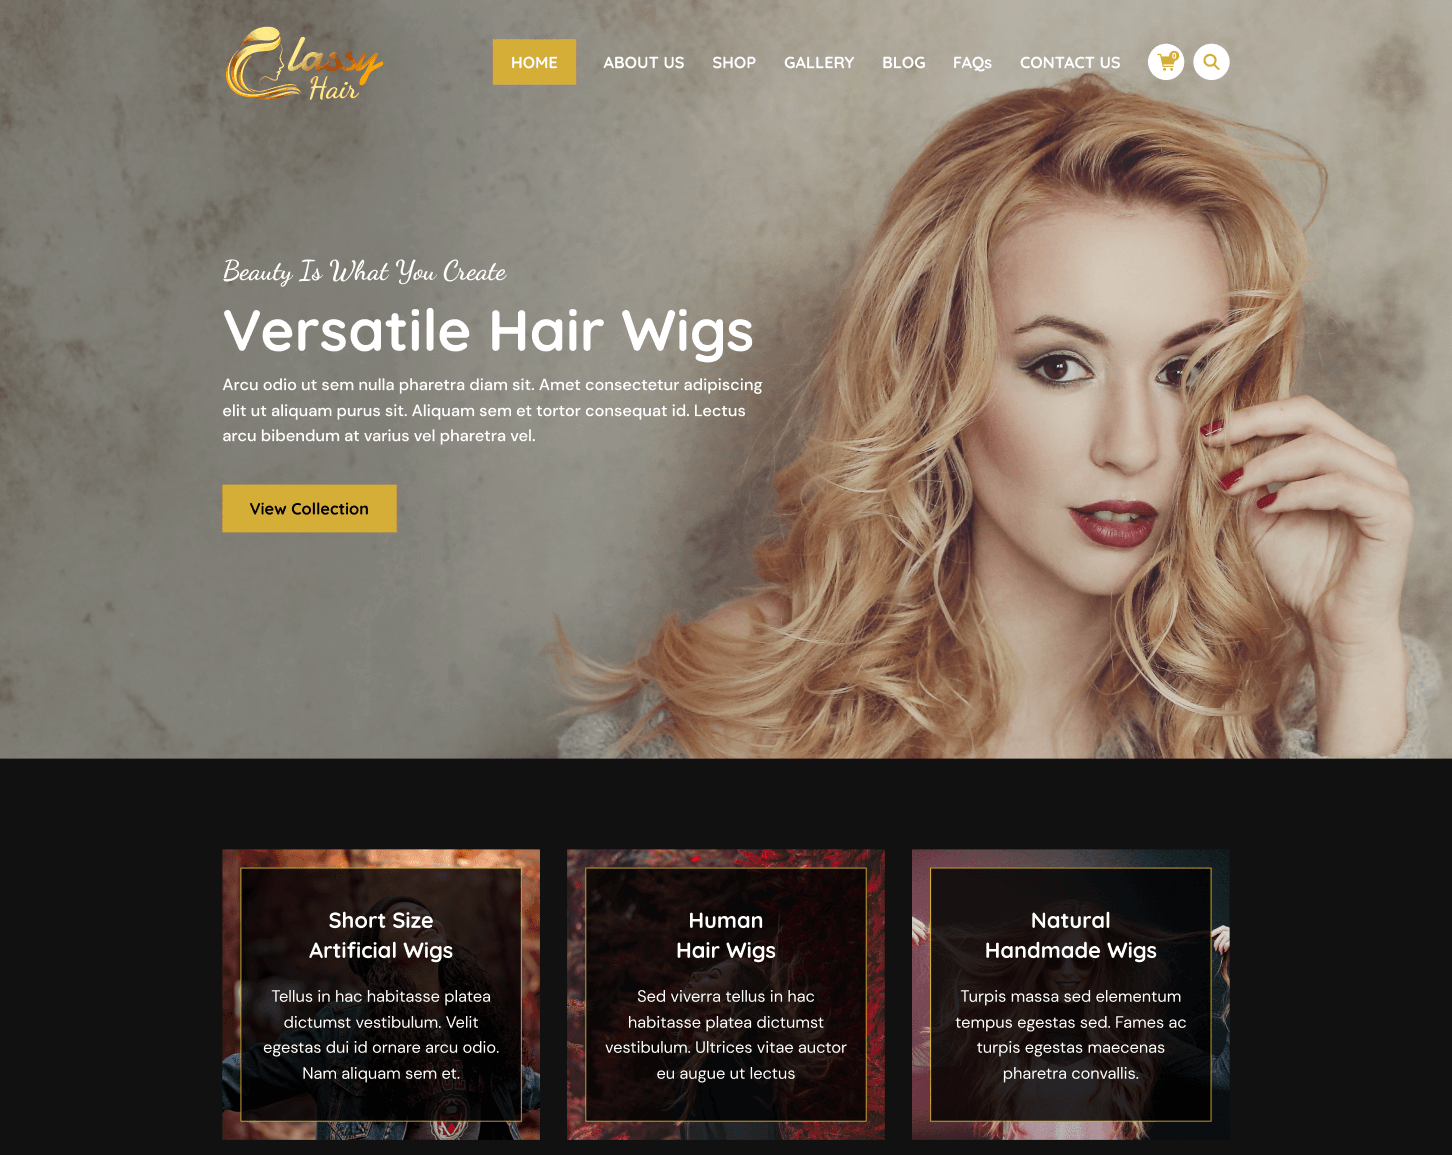 Classy Hair Home Page